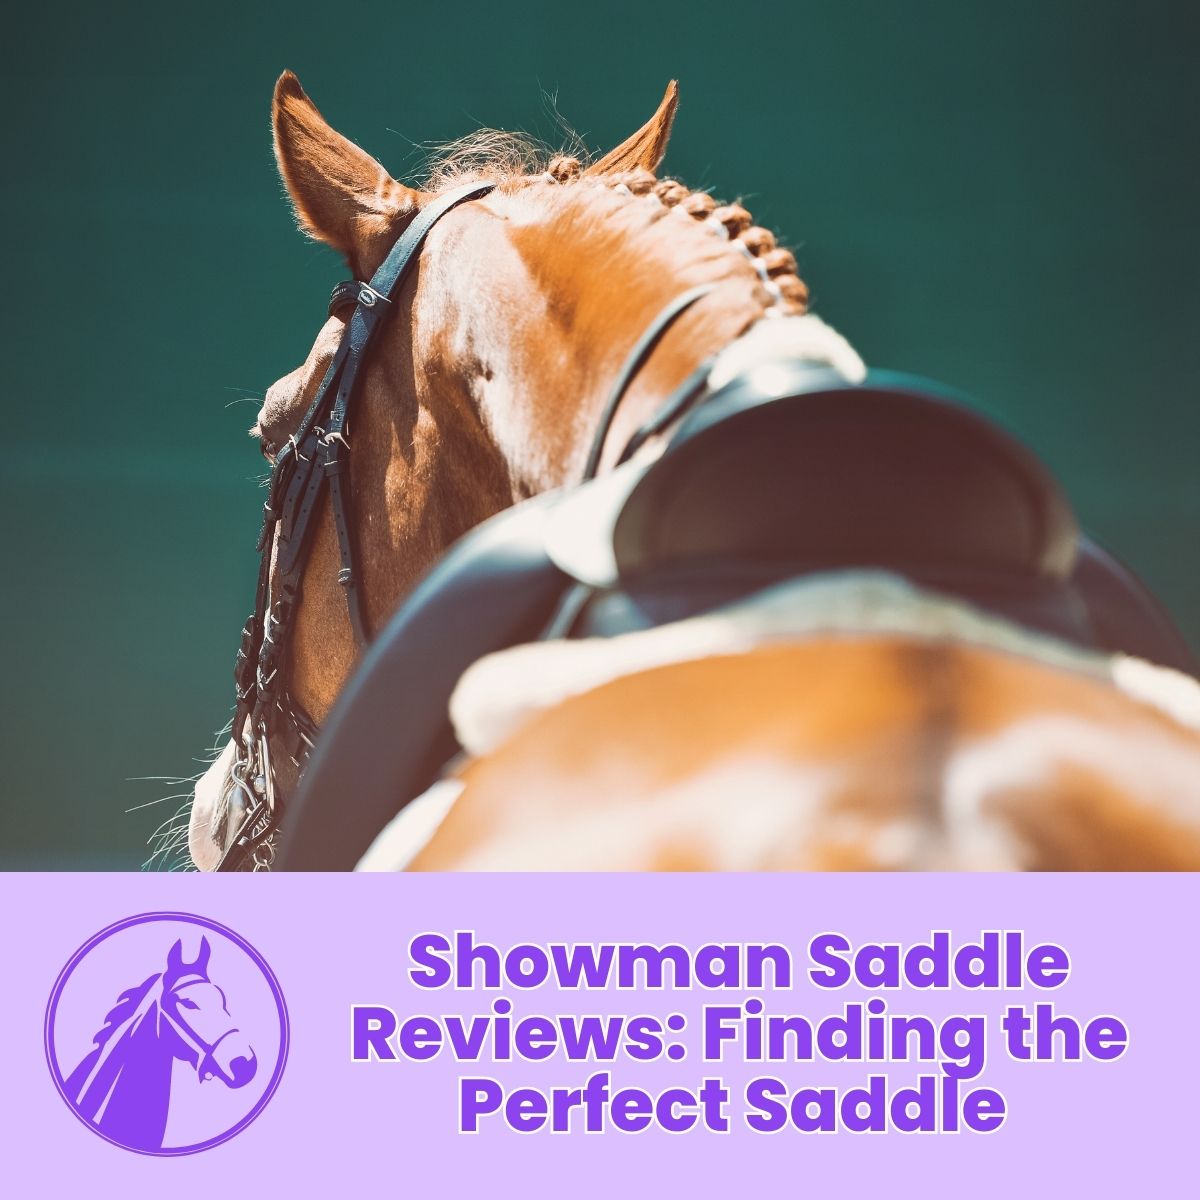 You are currently viewing Showman Saddle Reviews: Finding the Perfect Saddle